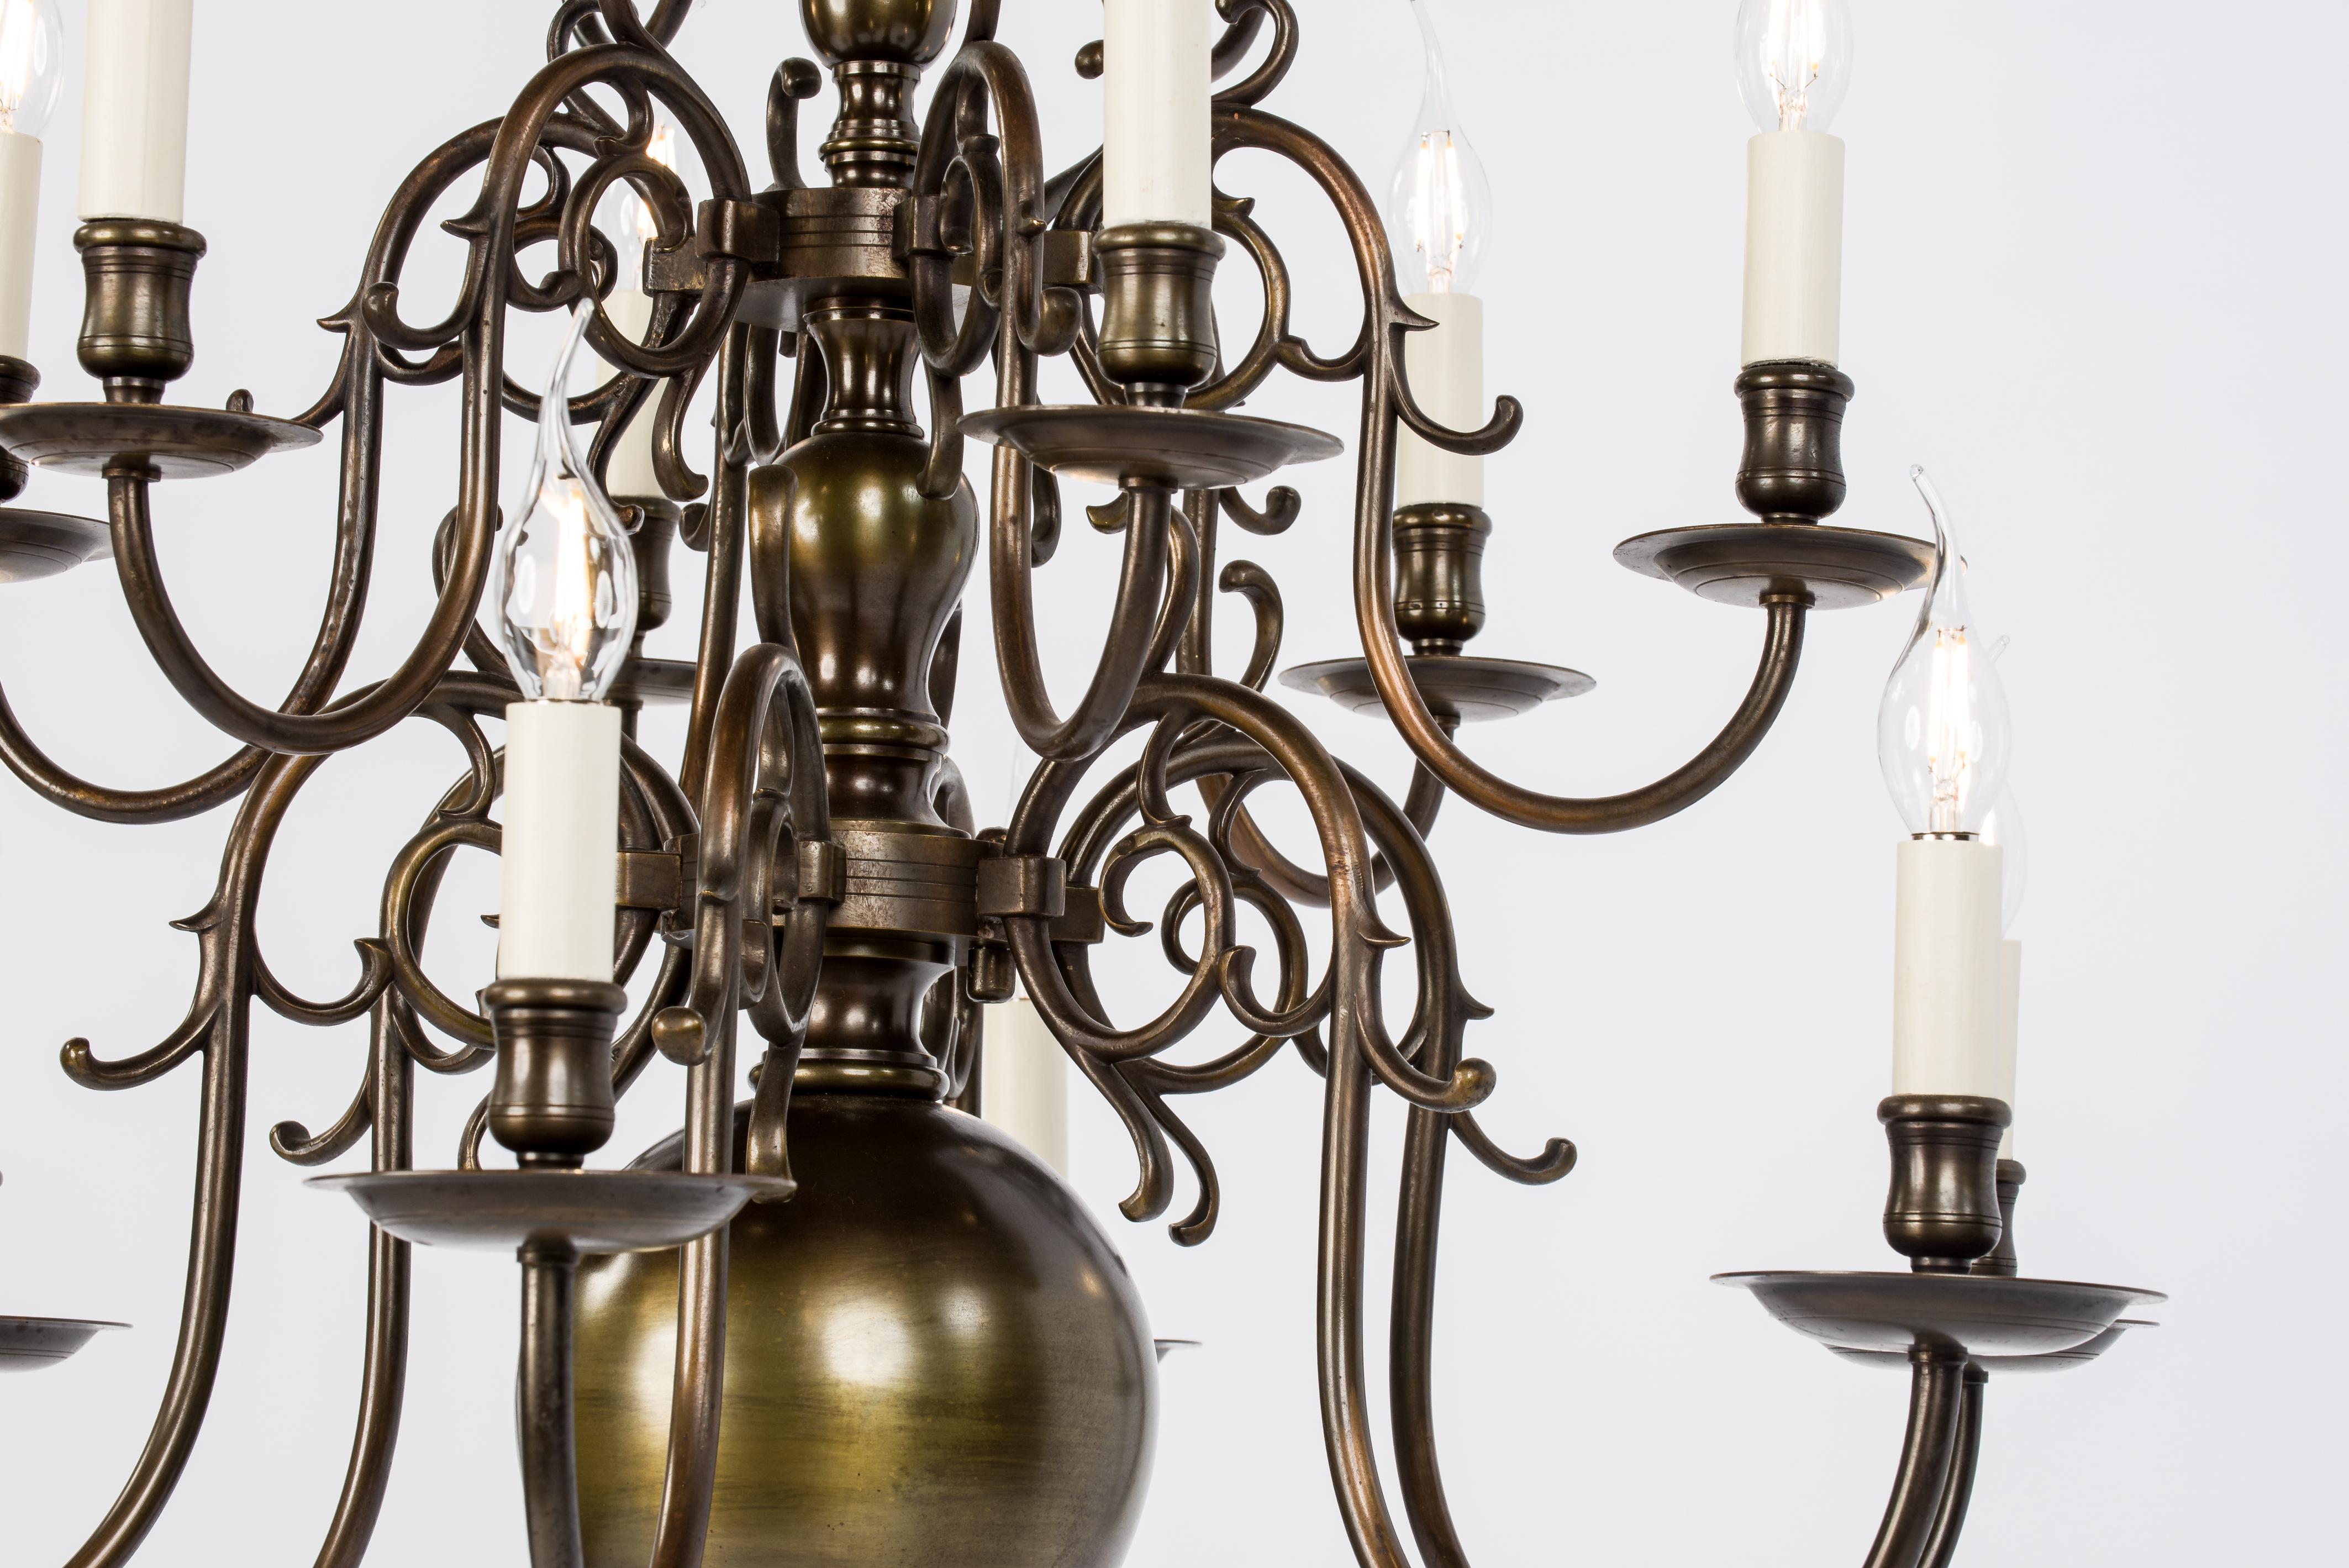 An exceptional tall three-tier Dutch chandelier in patinated brass. The chandelier originates in The Netherlands and was made in the early 1900s. It has the typical shape that Dutch or Flemish chandeliers are known for. It has a central column of